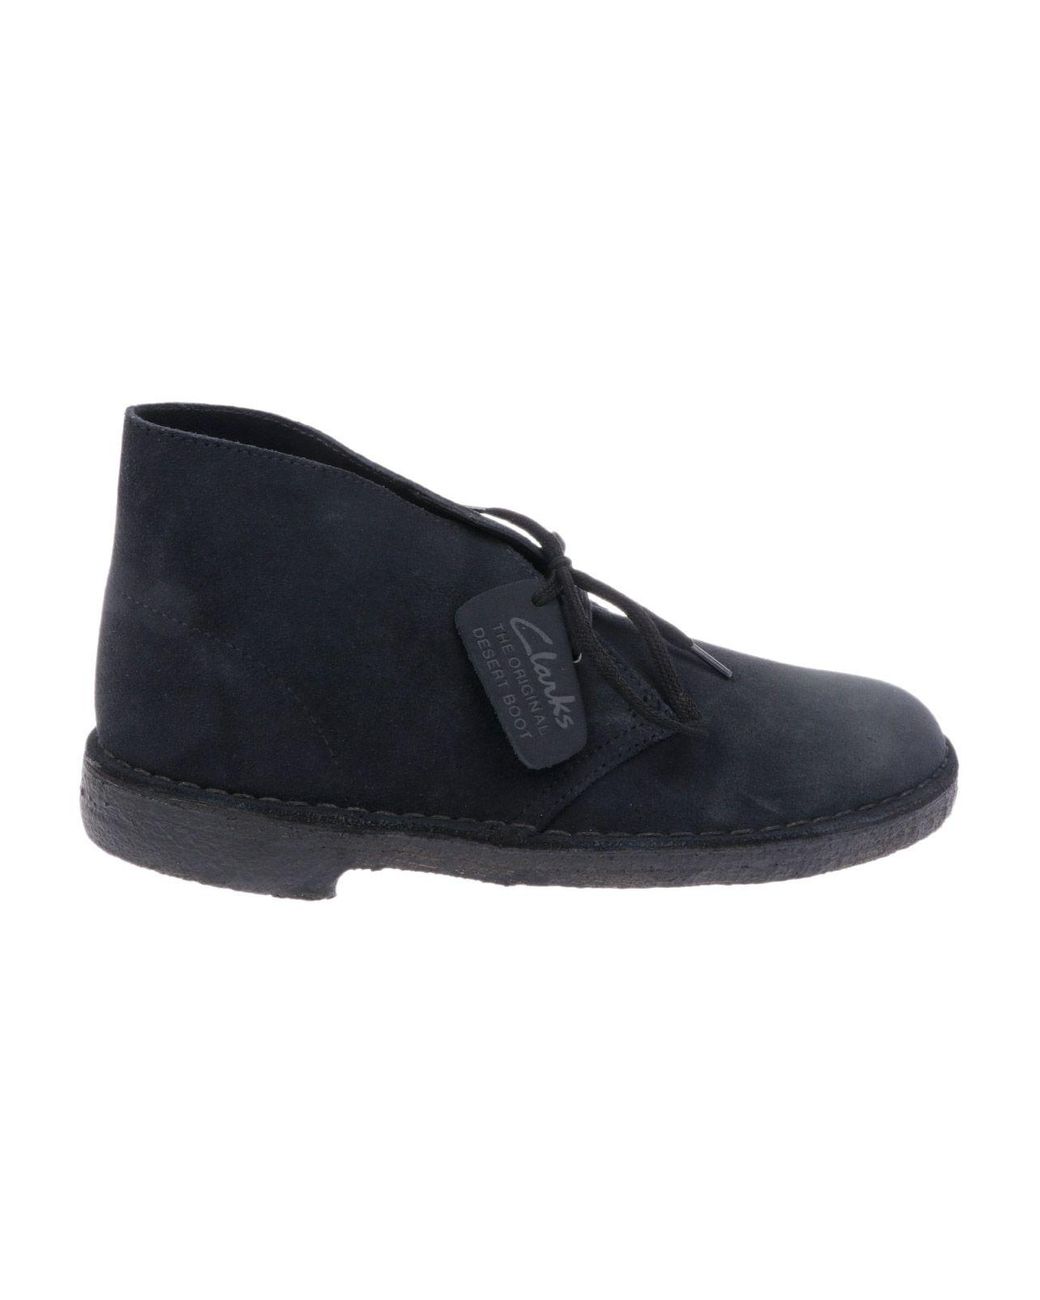 Clarks Blue Suede Ankle Boots for Men - Lyst